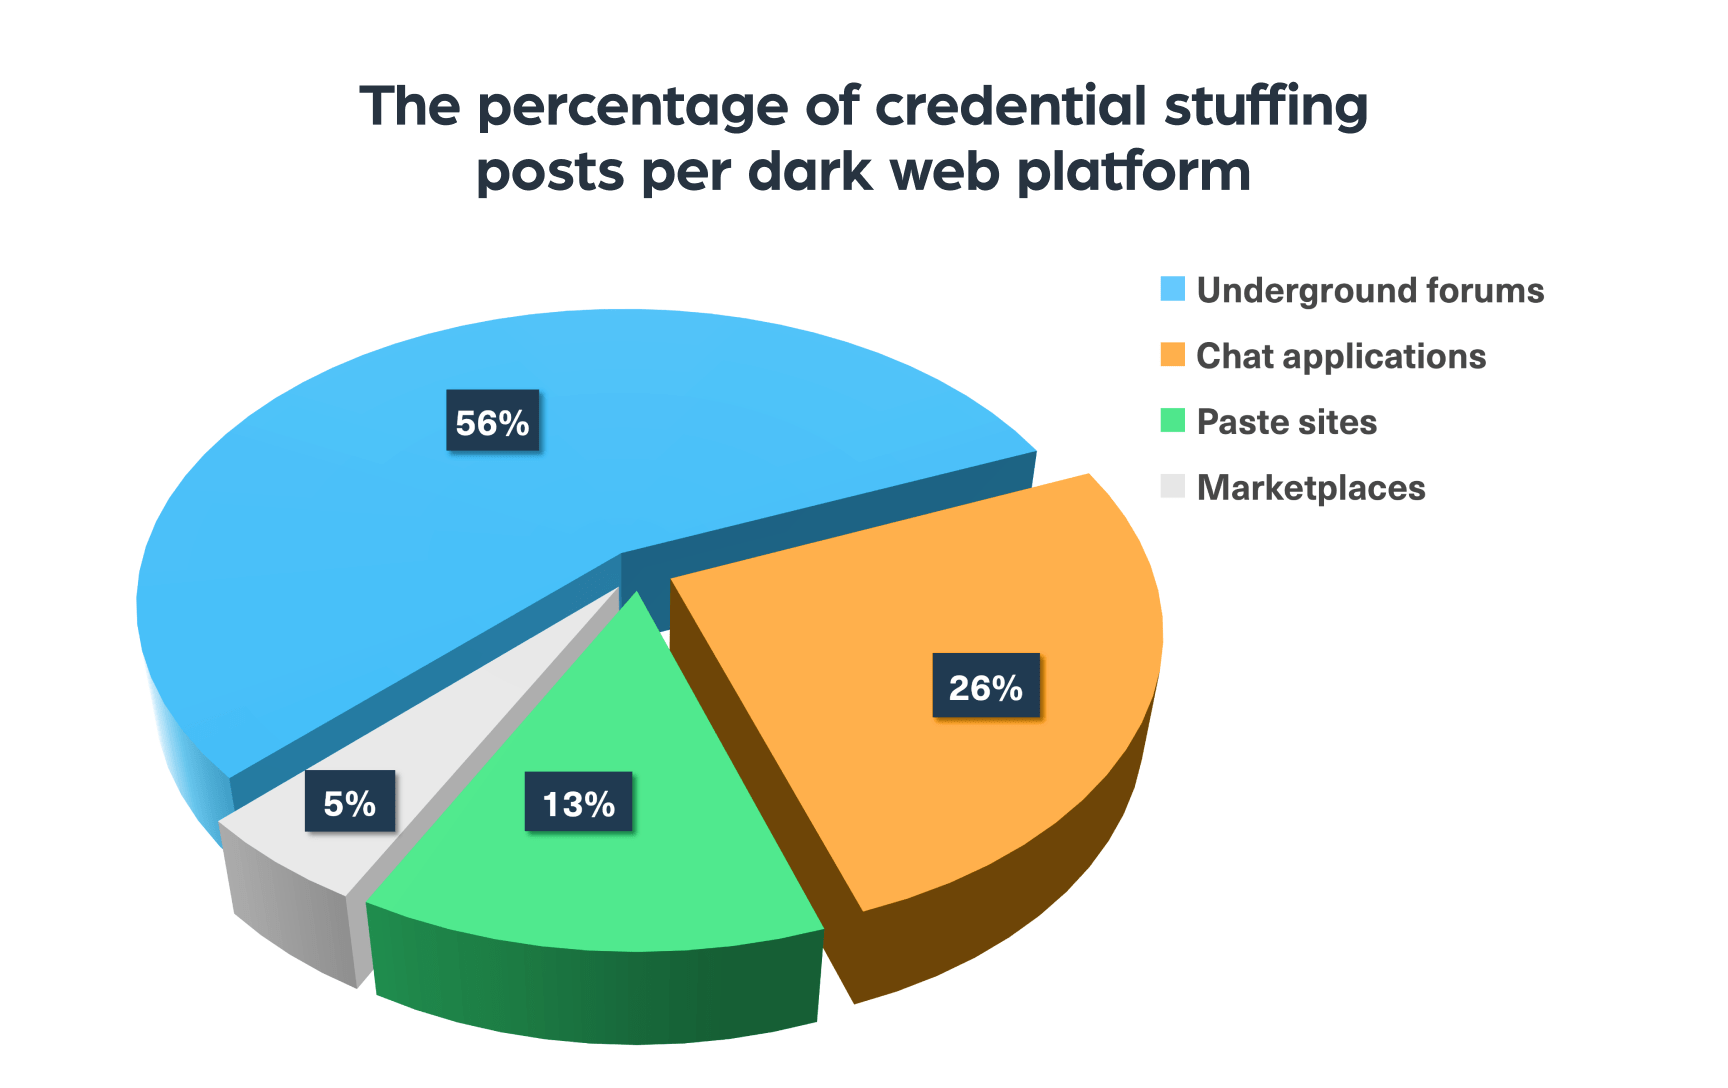 The dark web platforms in which most posts relating to credential stuffing are mentioned